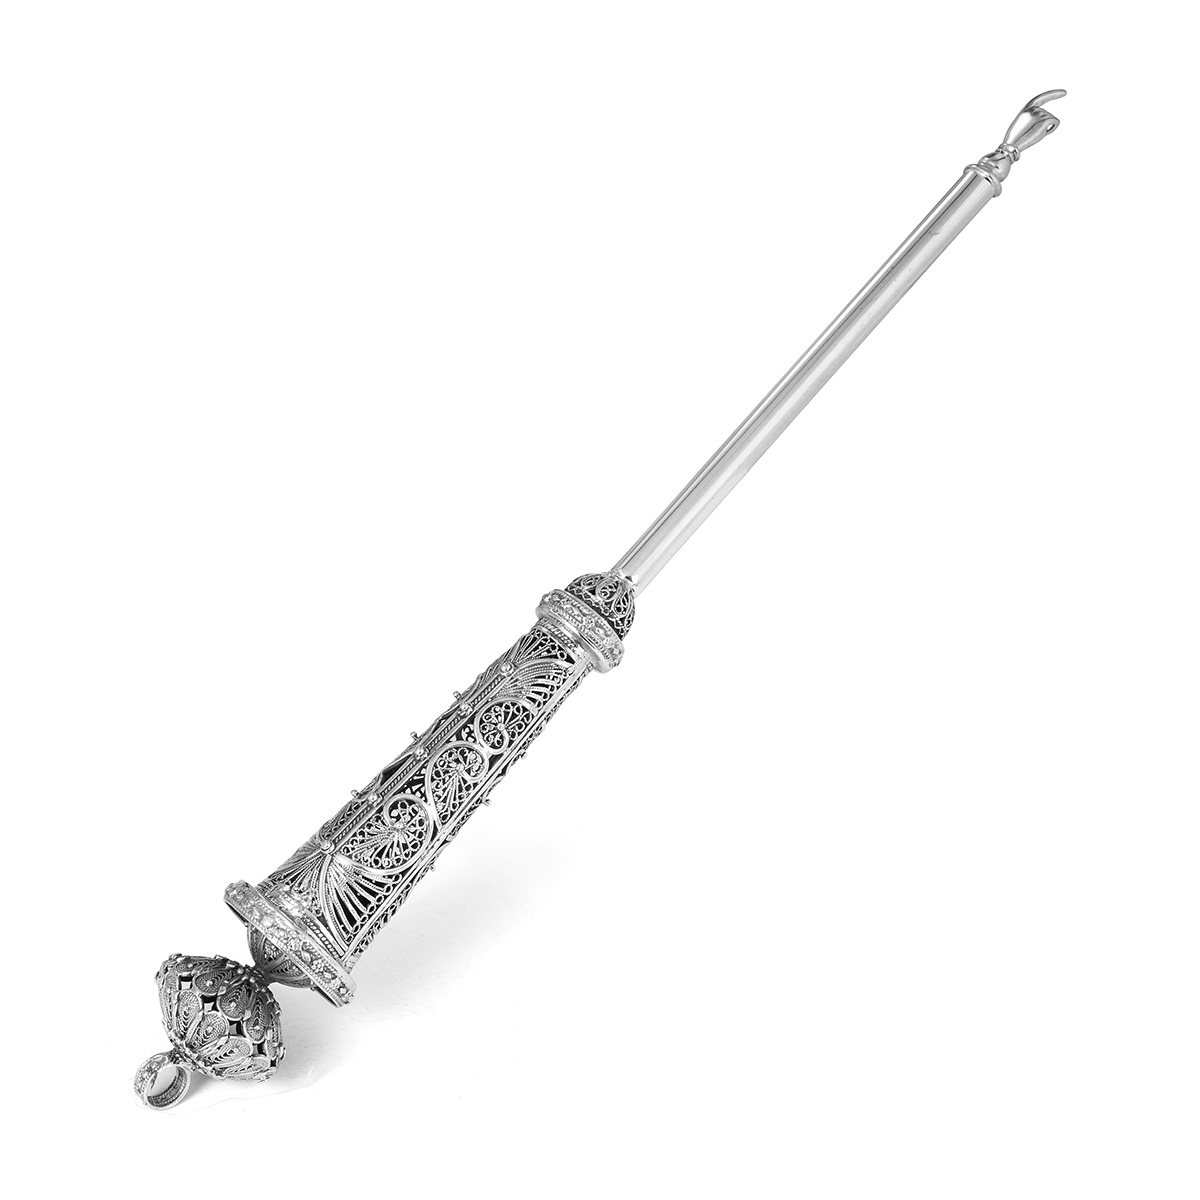 Traditional Yemenite Art Grand Handcrafted Sterling Silver Yad (Torah Pointer) With Filigree Design - 1